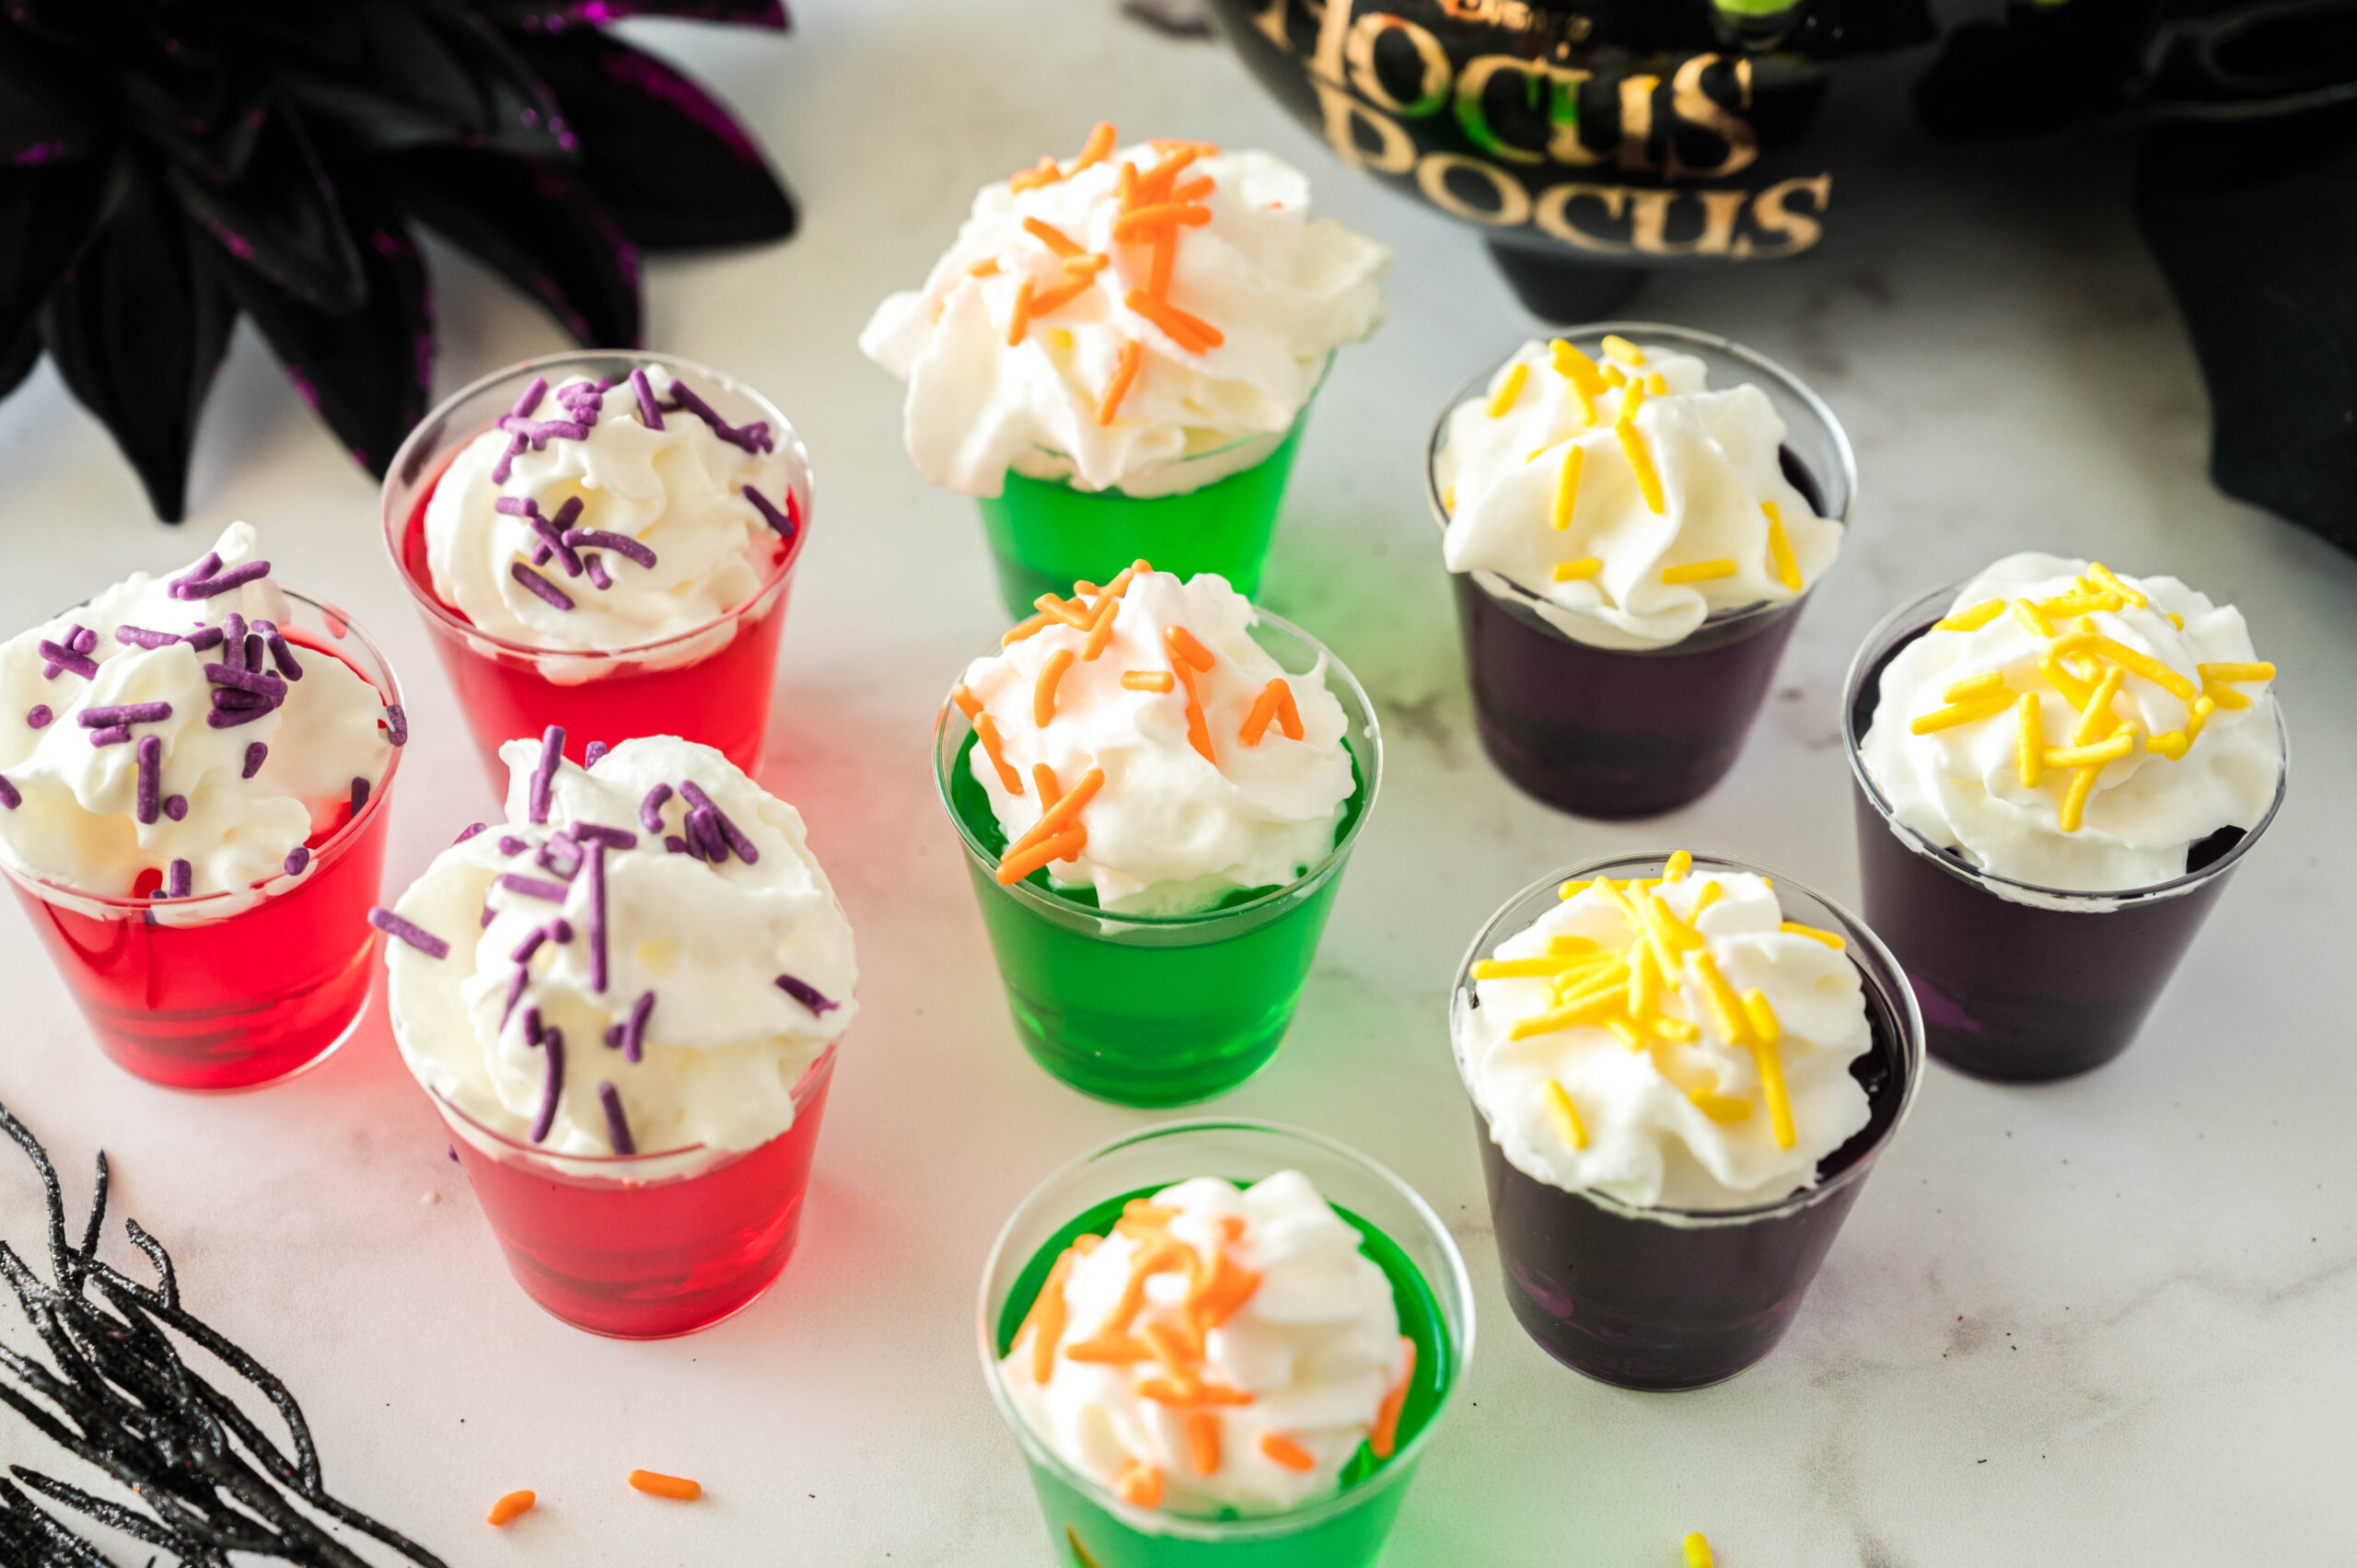 These Hocus Pocus Are Glorious and You Need To Serve Them Up For Halloween